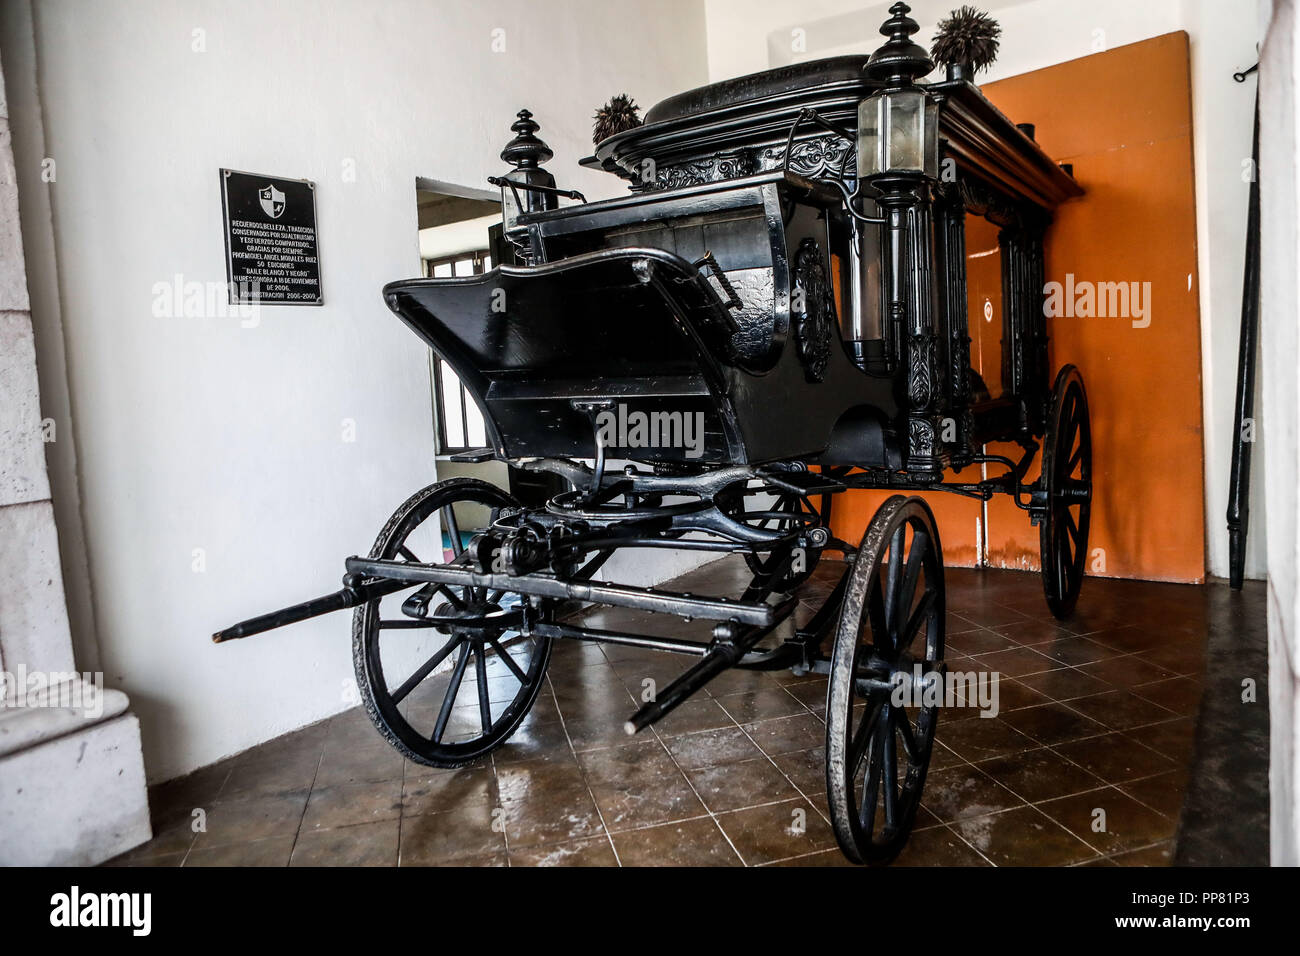 A cart, type of car, vehicle with two wheels.  Una carreta, tipo de carro, vehículo con dos ruedas. Ures regional museum in the state of Sonora, Mex Stock Photo